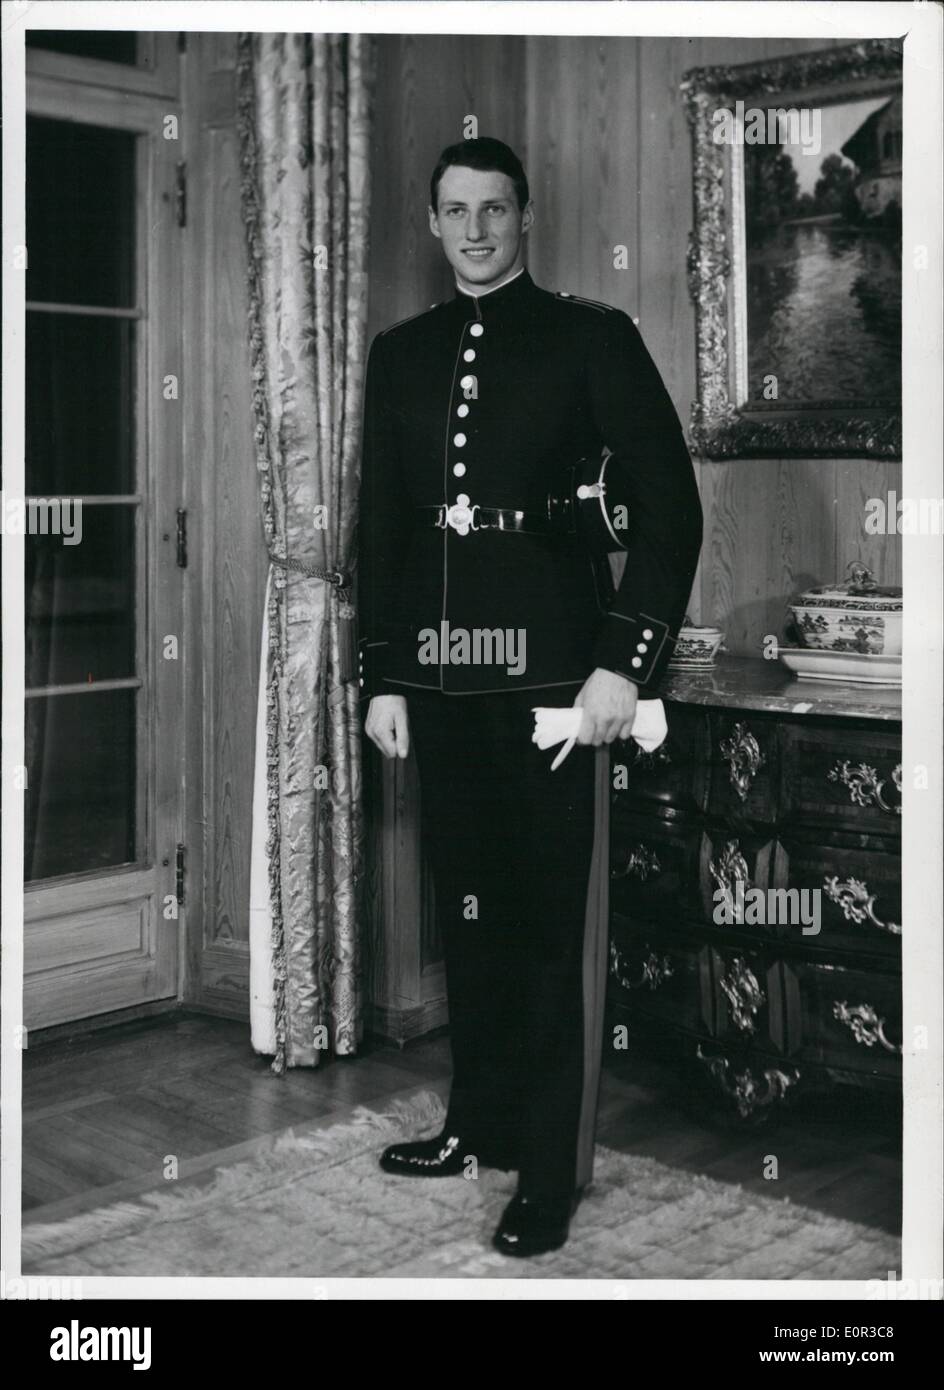 Jan. 01, 1958 - H.R.H Crown Prince Harald of Norway.: 21 year and coming into state of ~~~ ity on February 21st 1958 Photo shows the first pictures of the H.R.H Crown Prince Harald after the death of his grandfather King VII Stock Photo